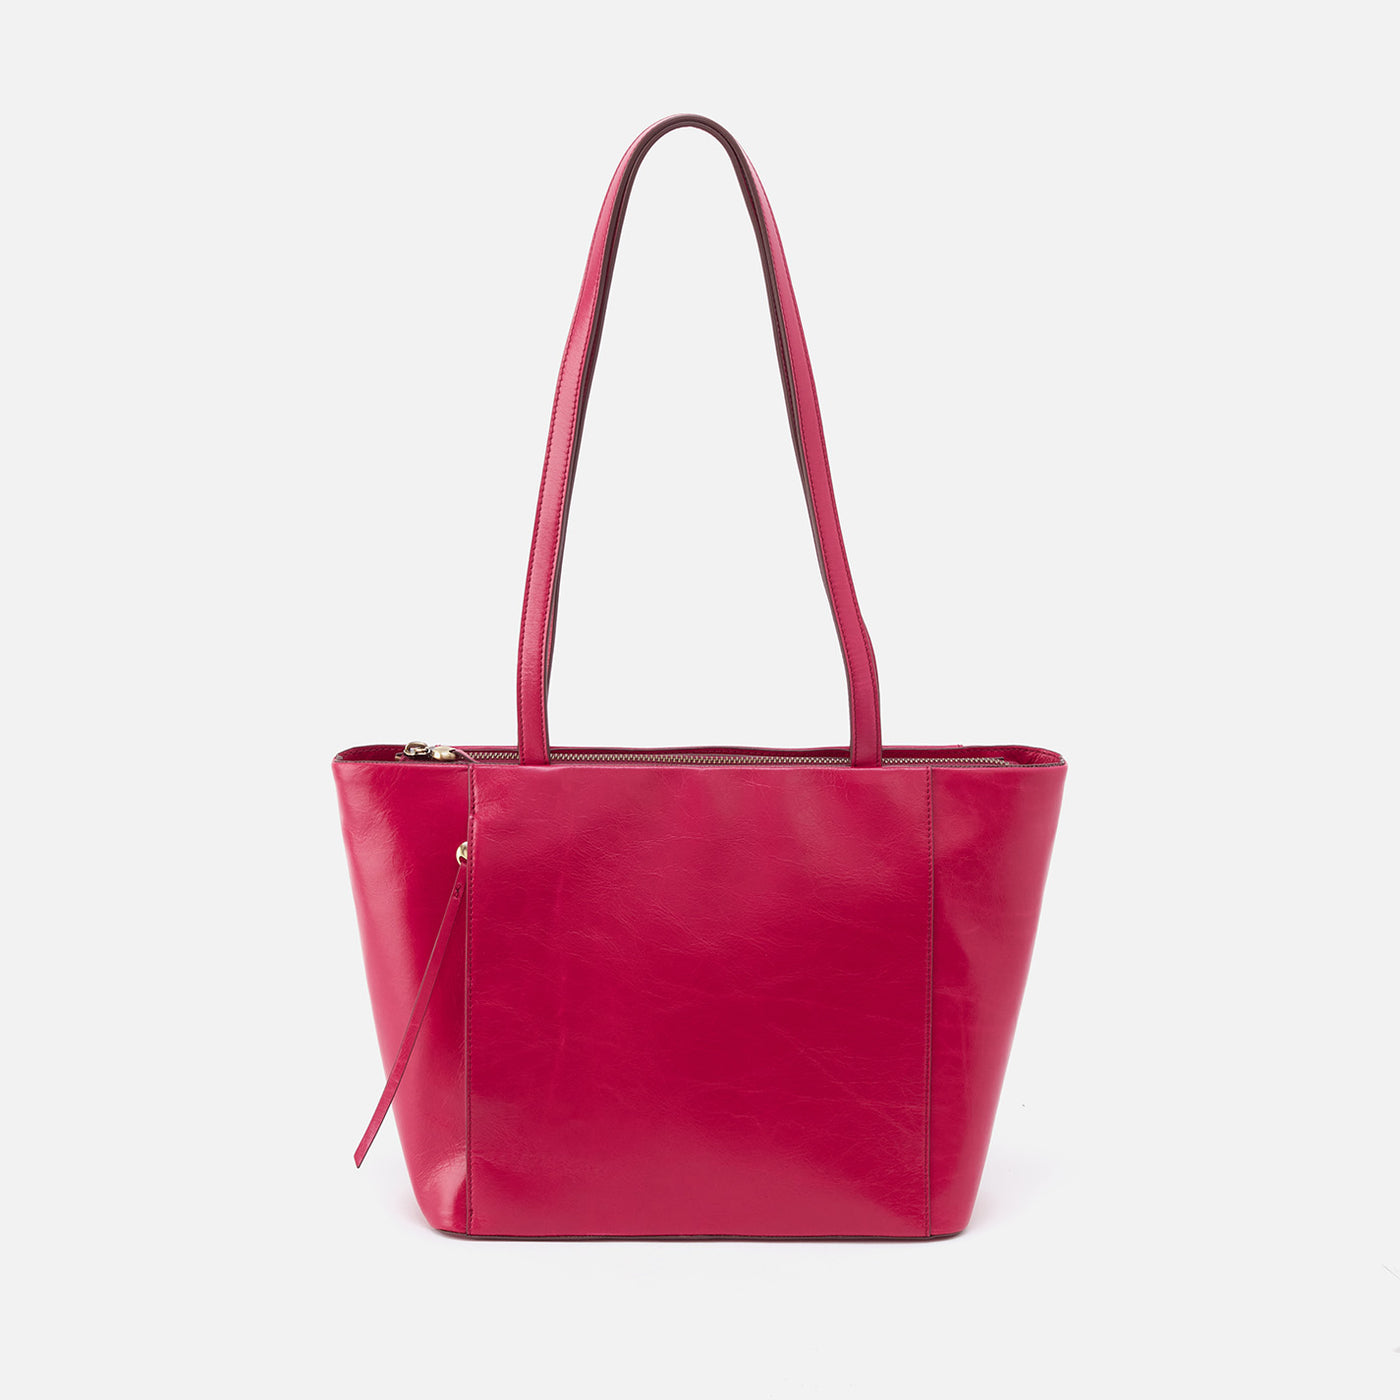 Haven Tote in Polished Leather - Fuchsia